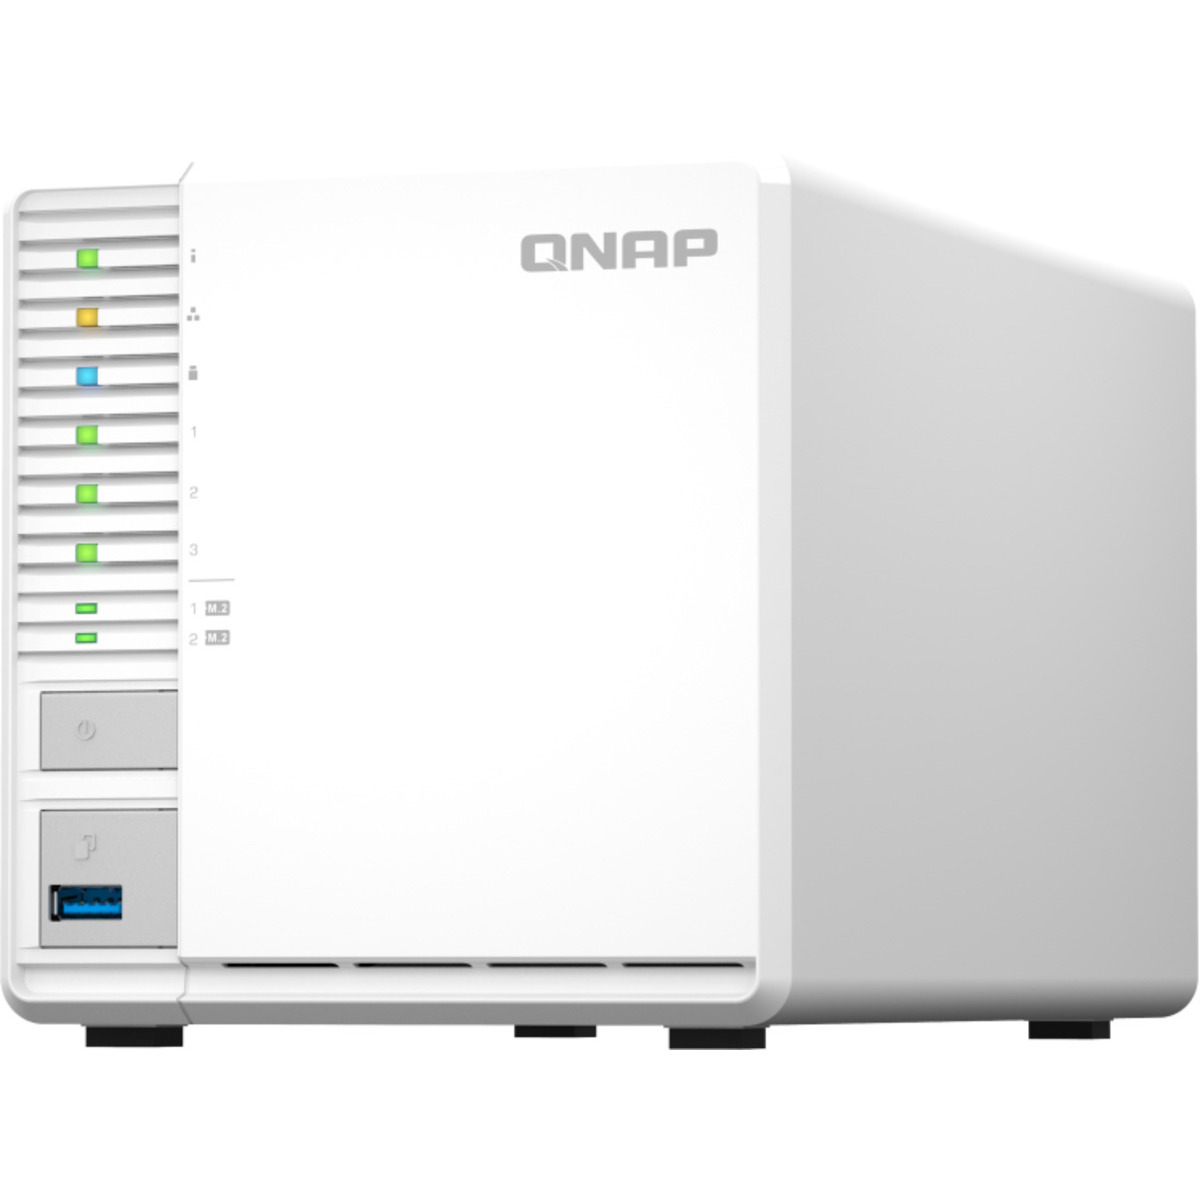 buy QNAP TS-364 48tb Desktop NAS - Network Attached Storage Device 3x16000gb Seagate EXOS X18 ST16000NM000J 3.5 7200rpm SATA 6Gb/s HDD ENTERPRISE Class Drives Installed - Burn-In Tested - nas headquarters buy network attached storage server device das new raid-5 free shipping usa spring sale TS-364